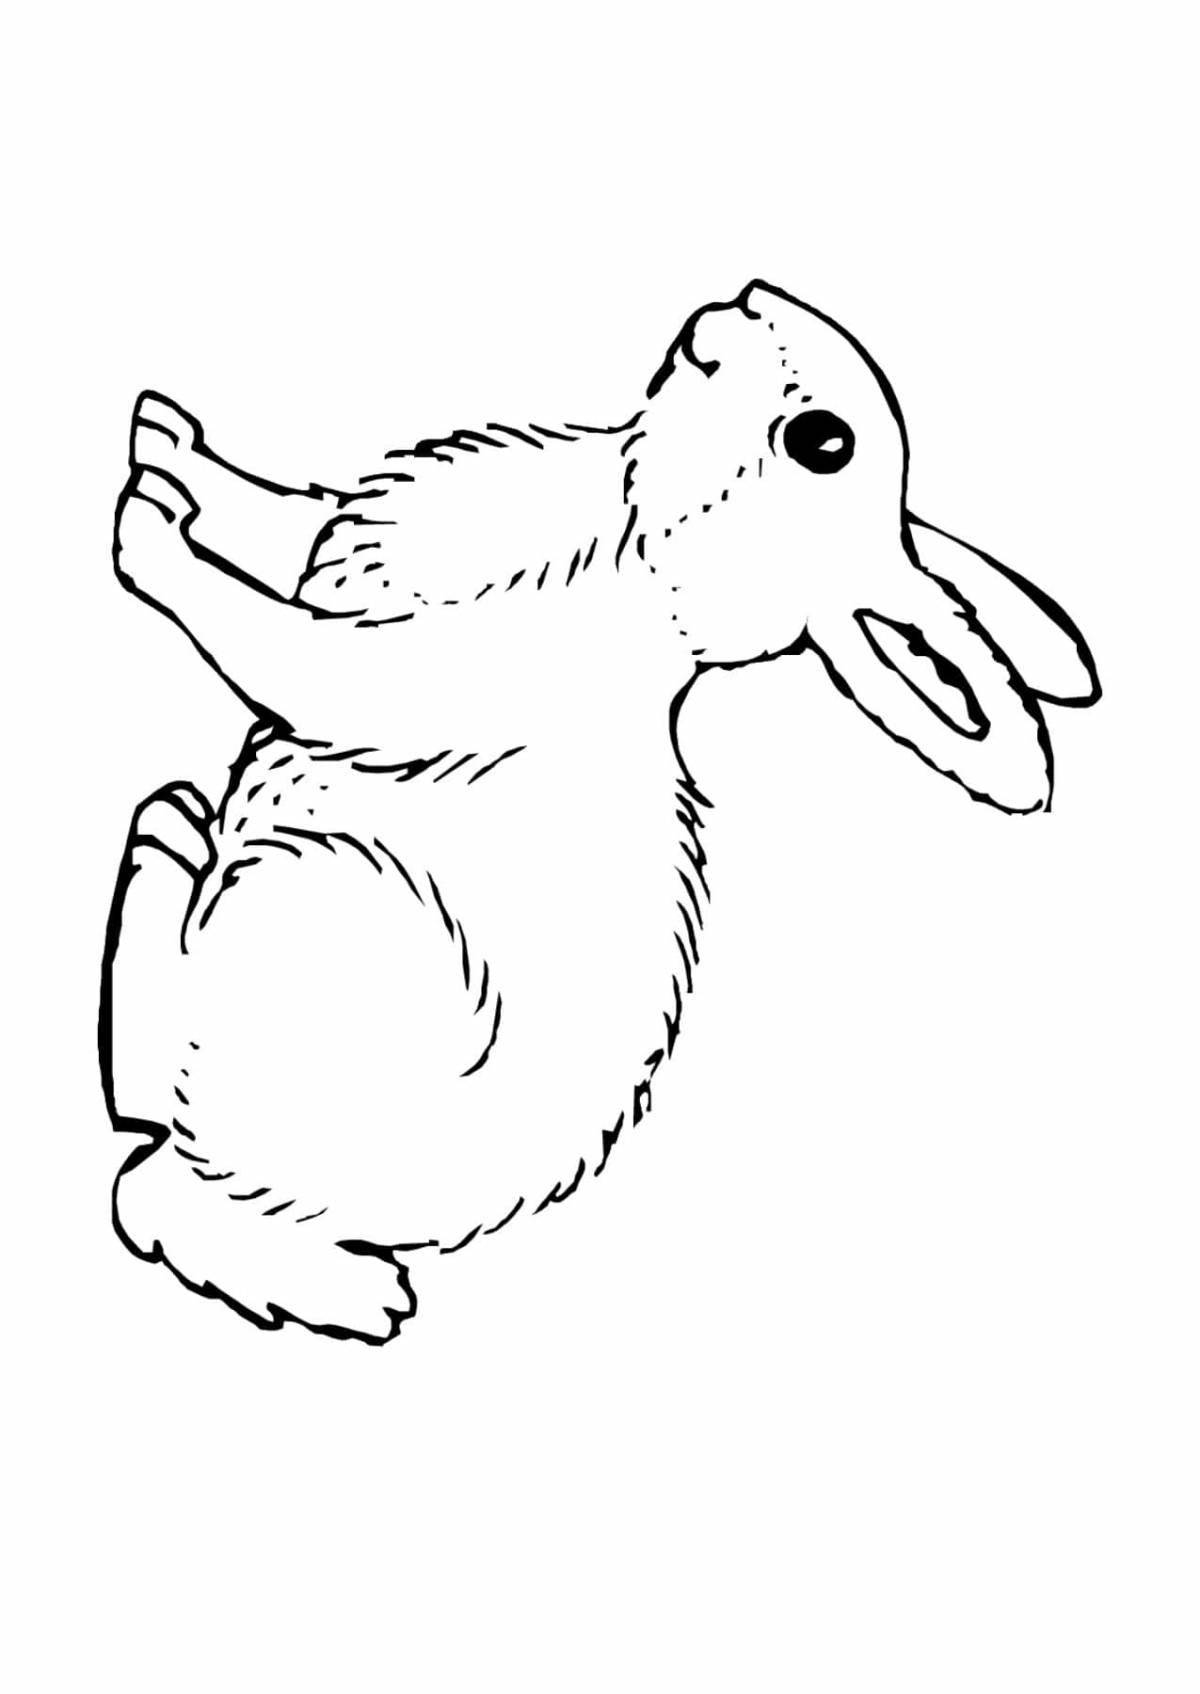 Rampant running hare coloring page